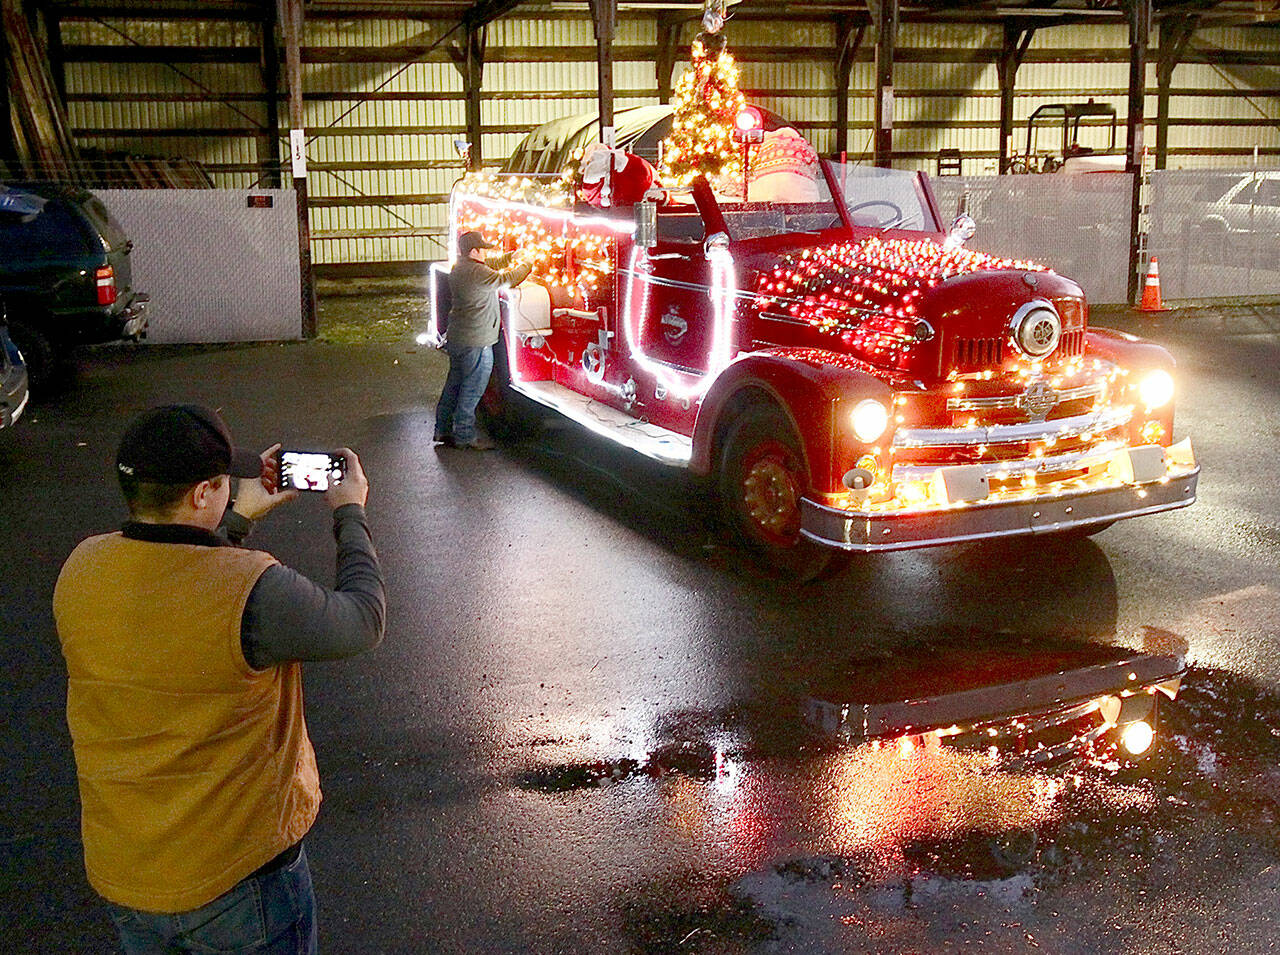 Tyler Gage photographs a fire engine while Adam DeFilippo finishes decorating the old fire engine in preparation for two Operation Candy Cane programs in Port Angeles. (Dave Logan/for Peninsula Daily News)